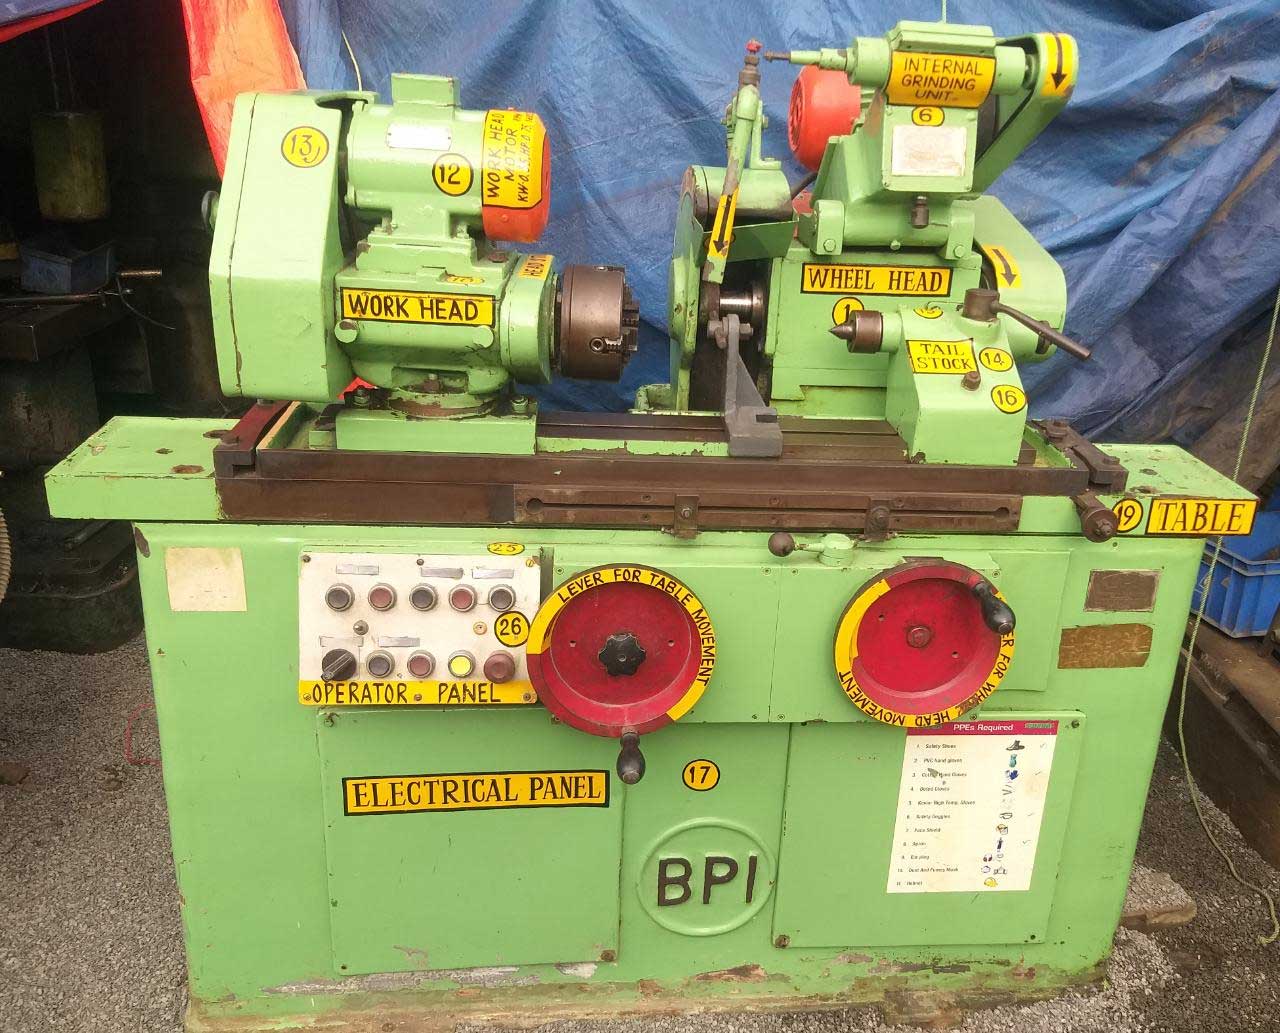 Old Machinery Suppliers and Dealers in Pune, Second Hand, Used and Refurbished Machinery in Pune | Puja Enterprises